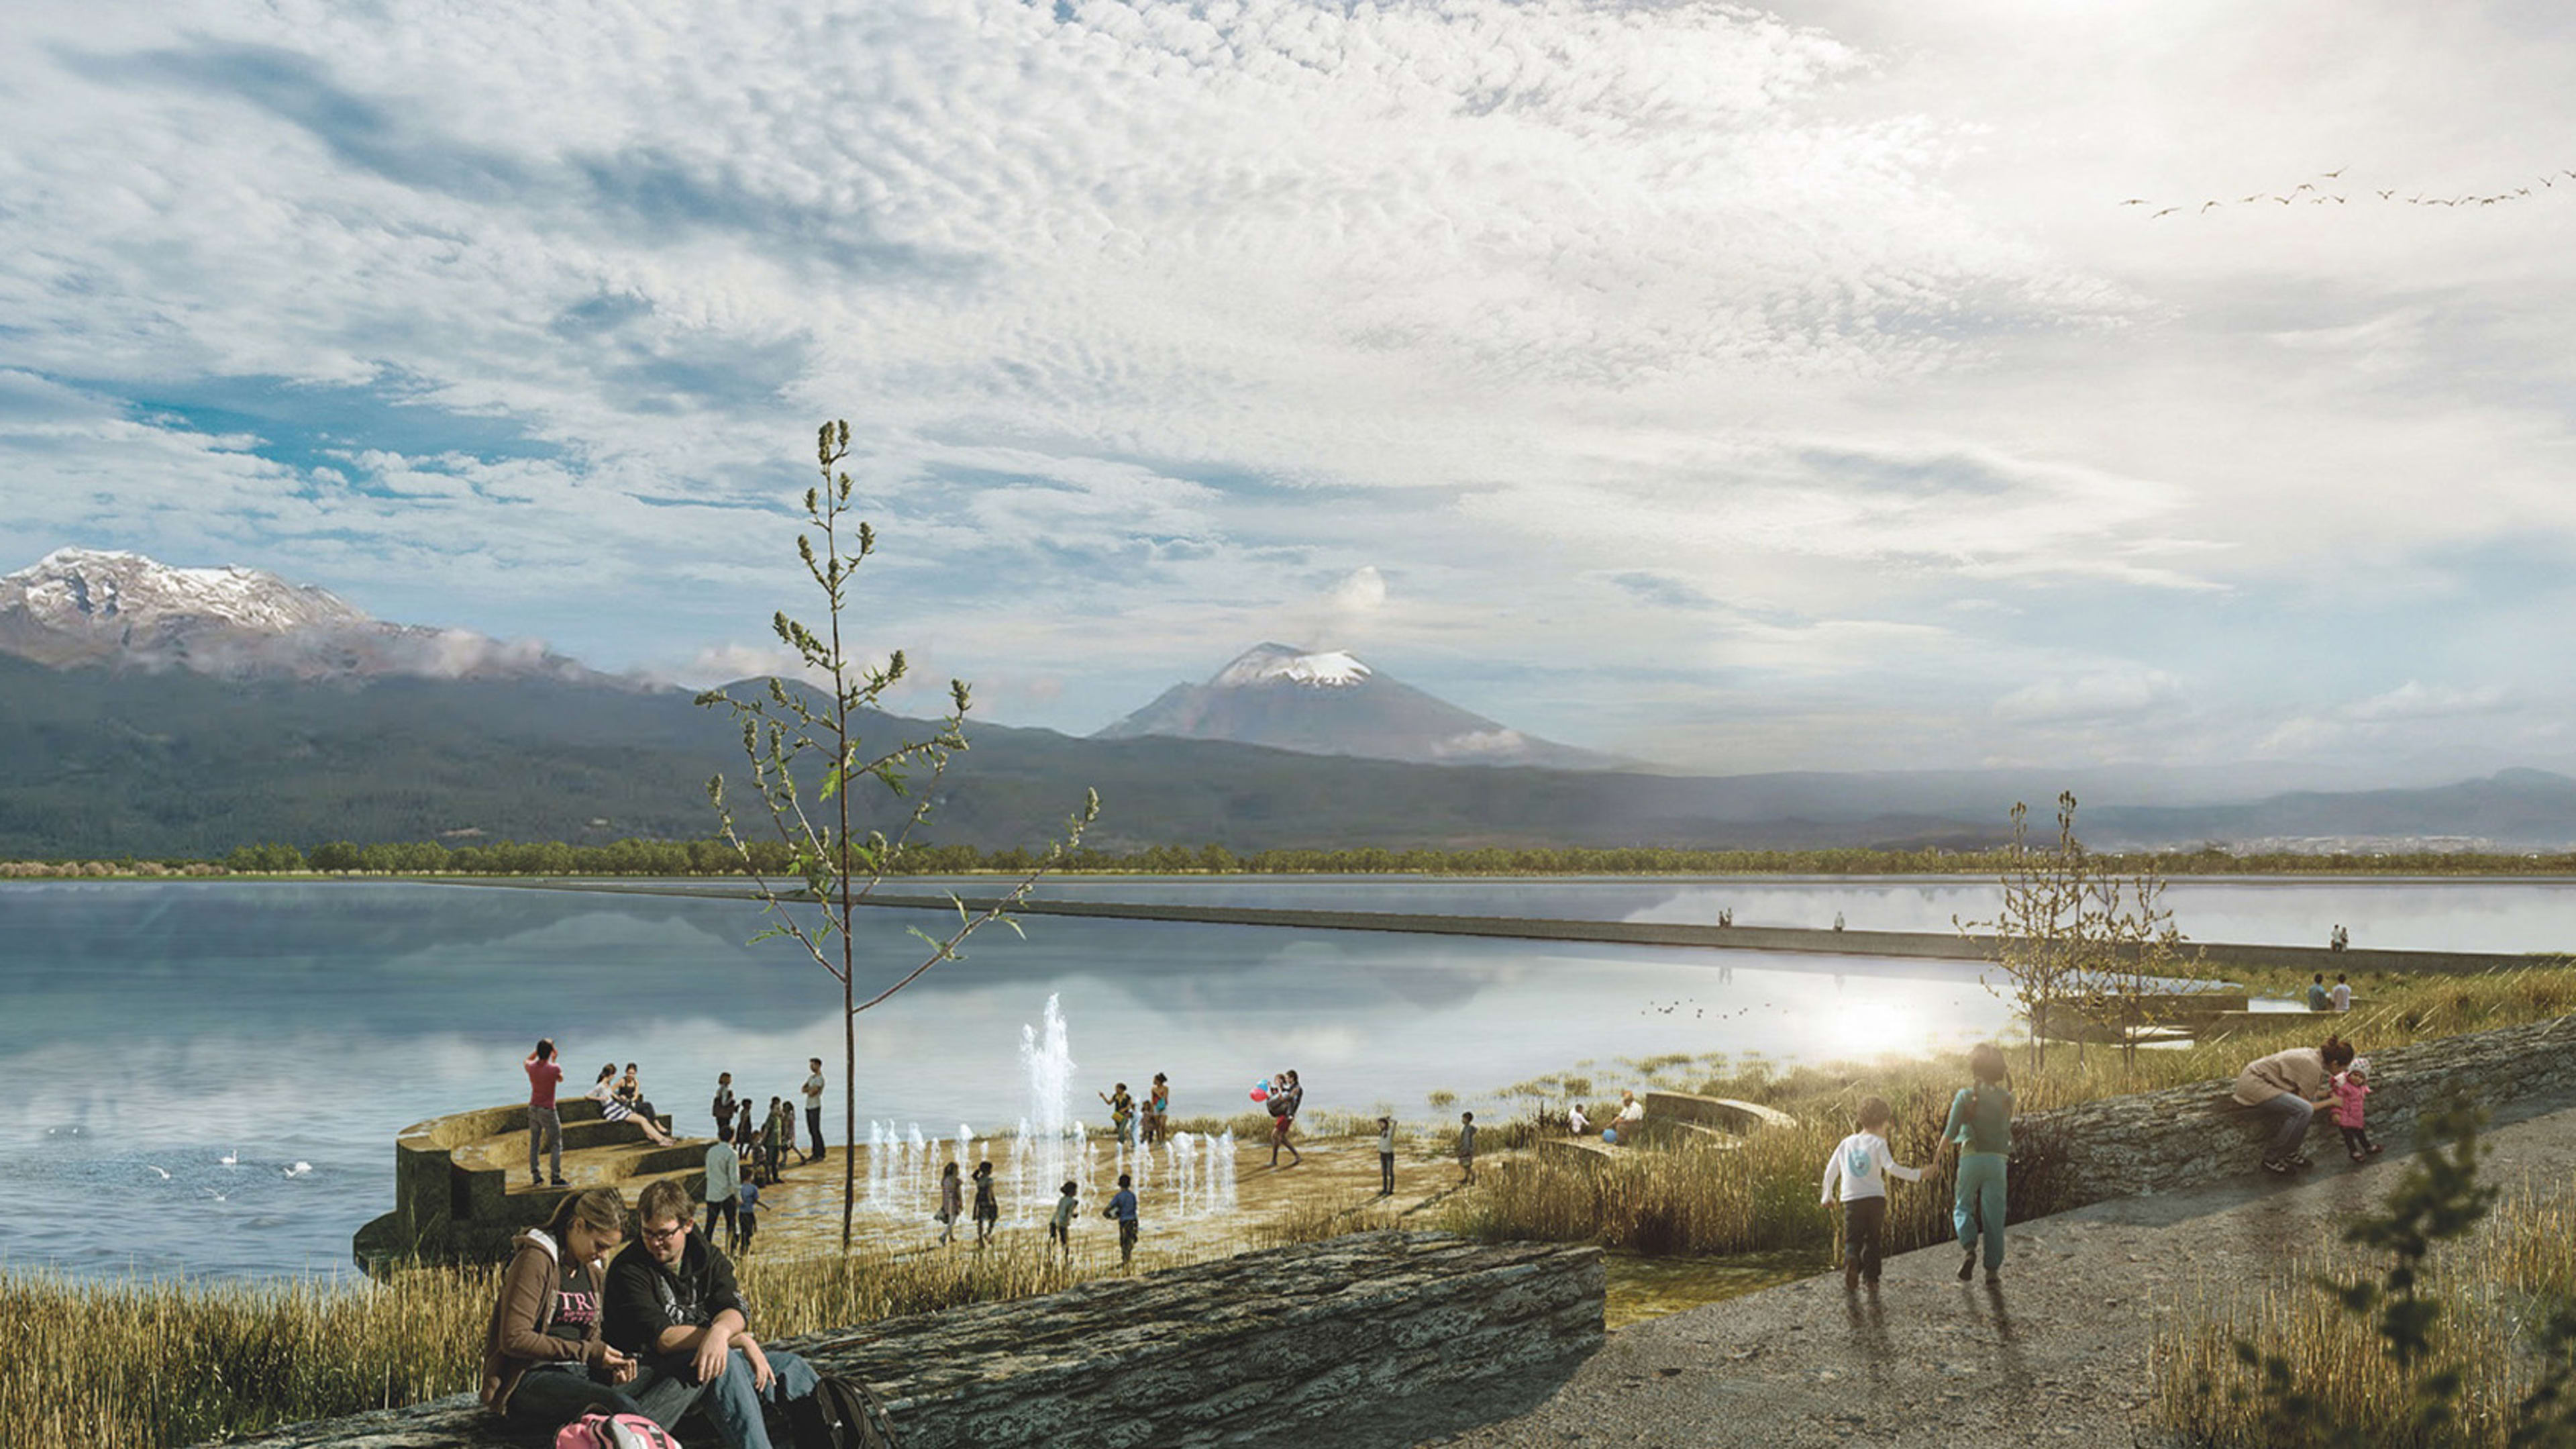 Instead of a new airport, Mexico might build one of the world’s largest urban parks